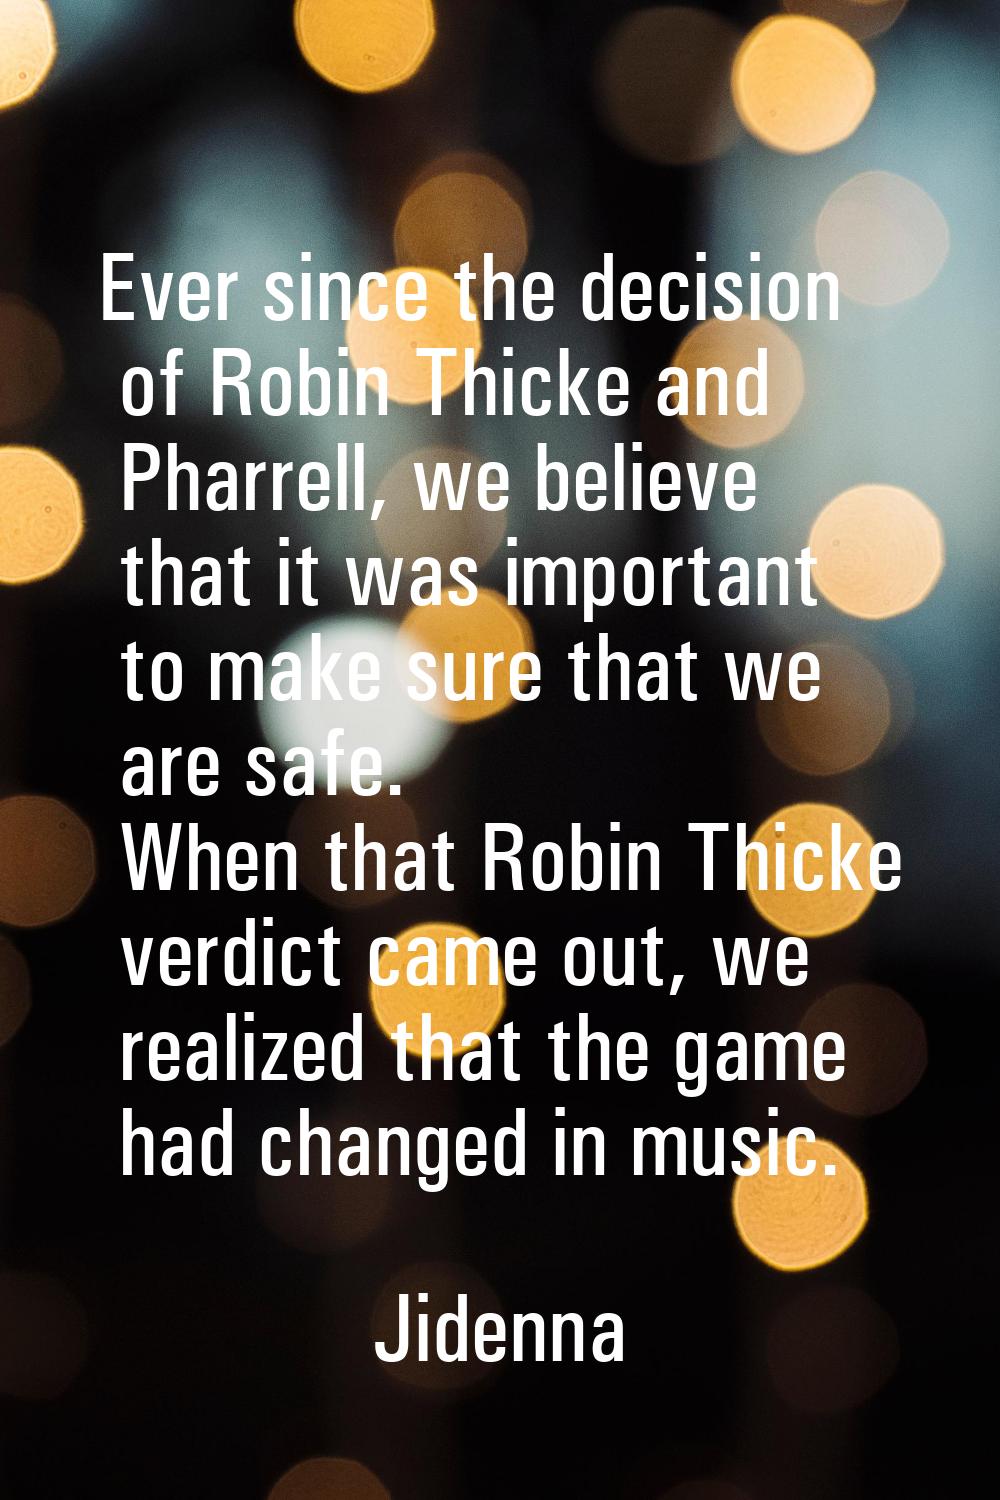 Ever since the decision of Robin Thicke and Pharrell, we believe that it was important to make sure